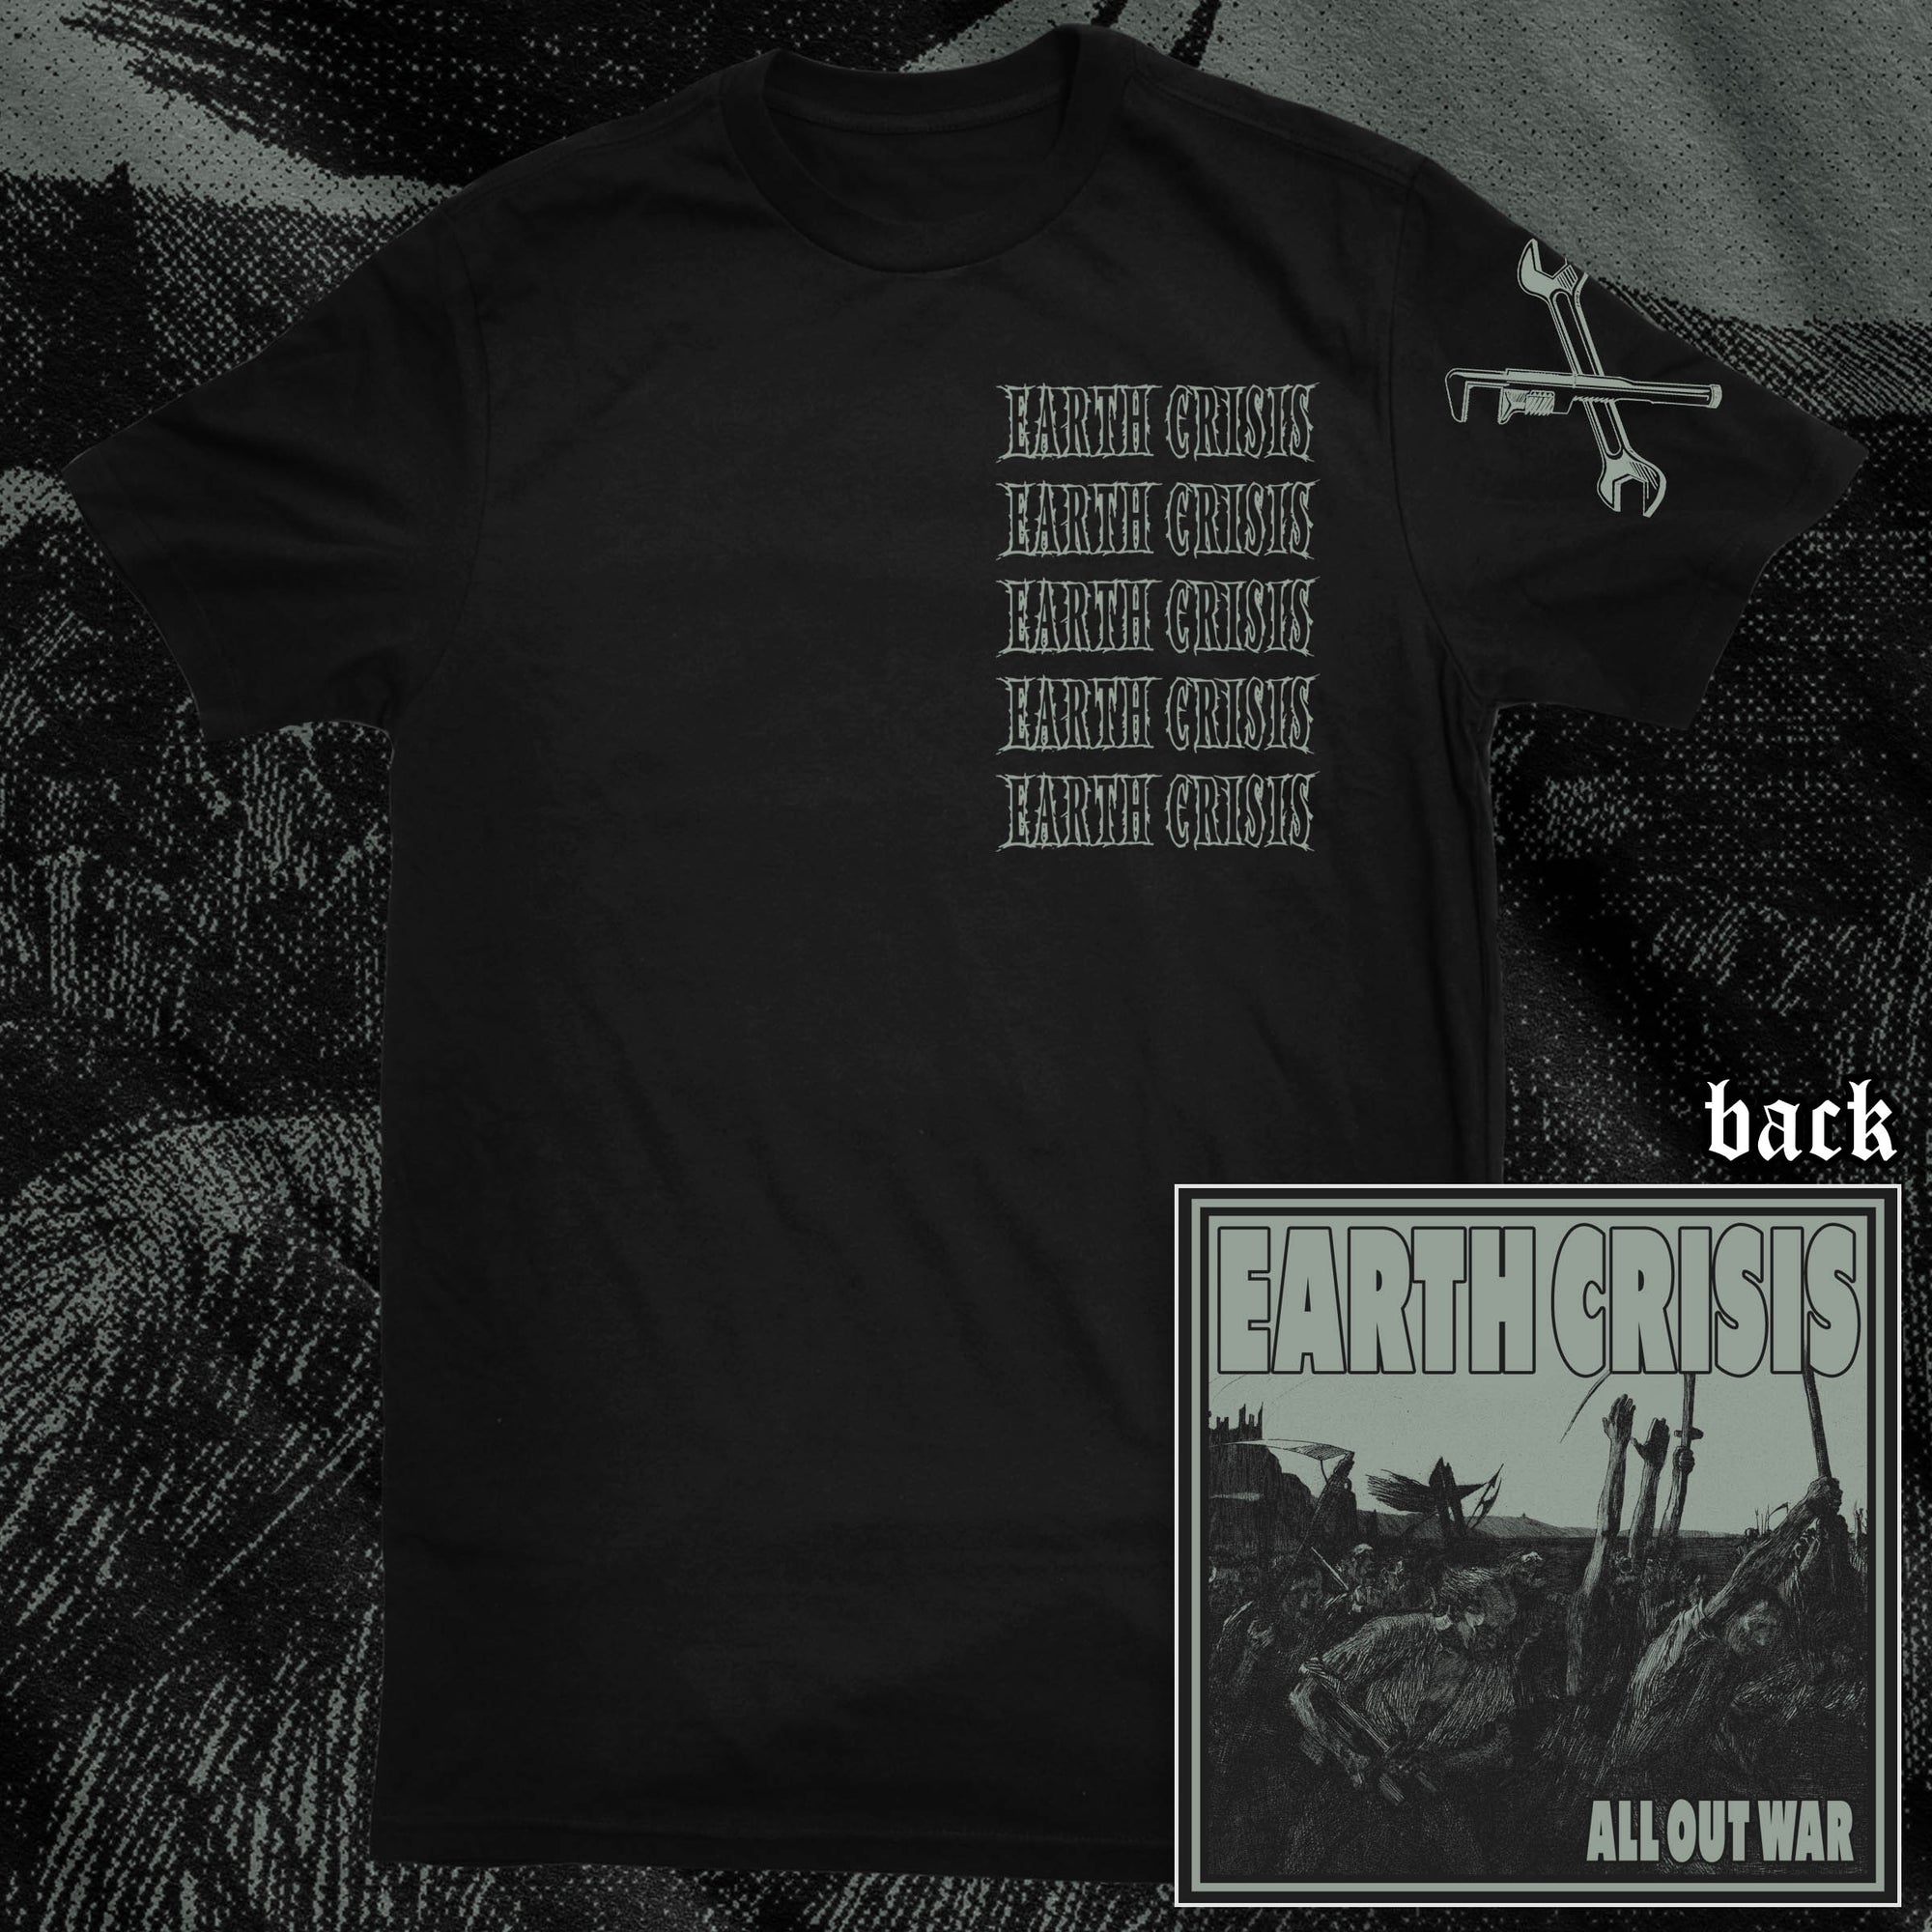 EARTH CRISIS "ALL OUT WAR" ALBUM COVER SHIRT